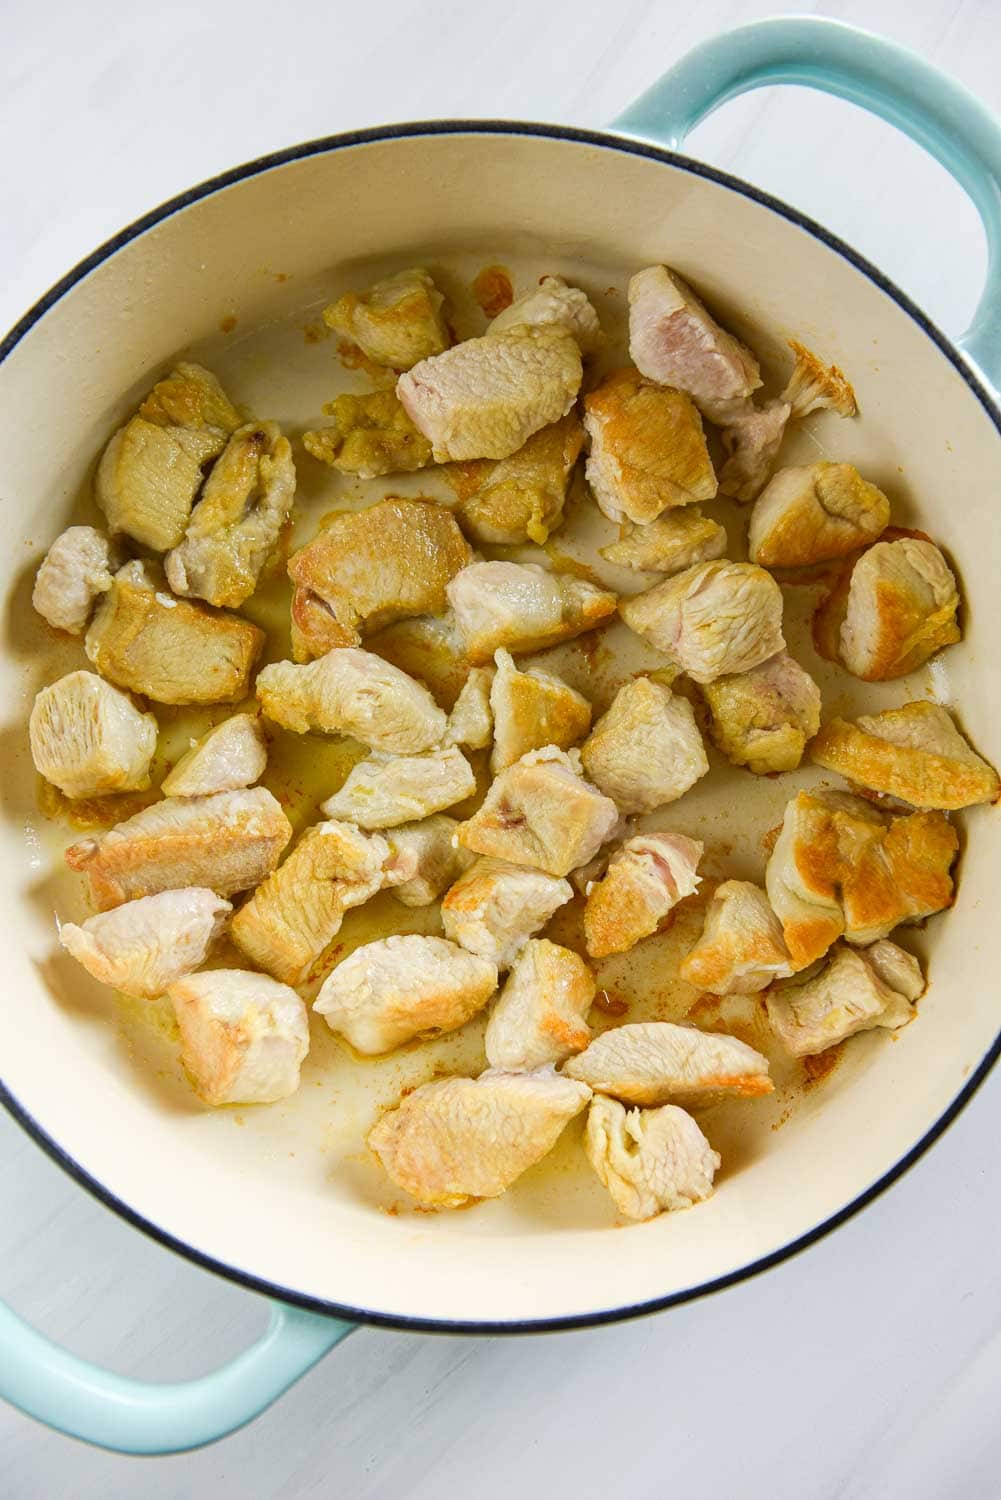 Cooked chicken pieces in shallow Dutch oven